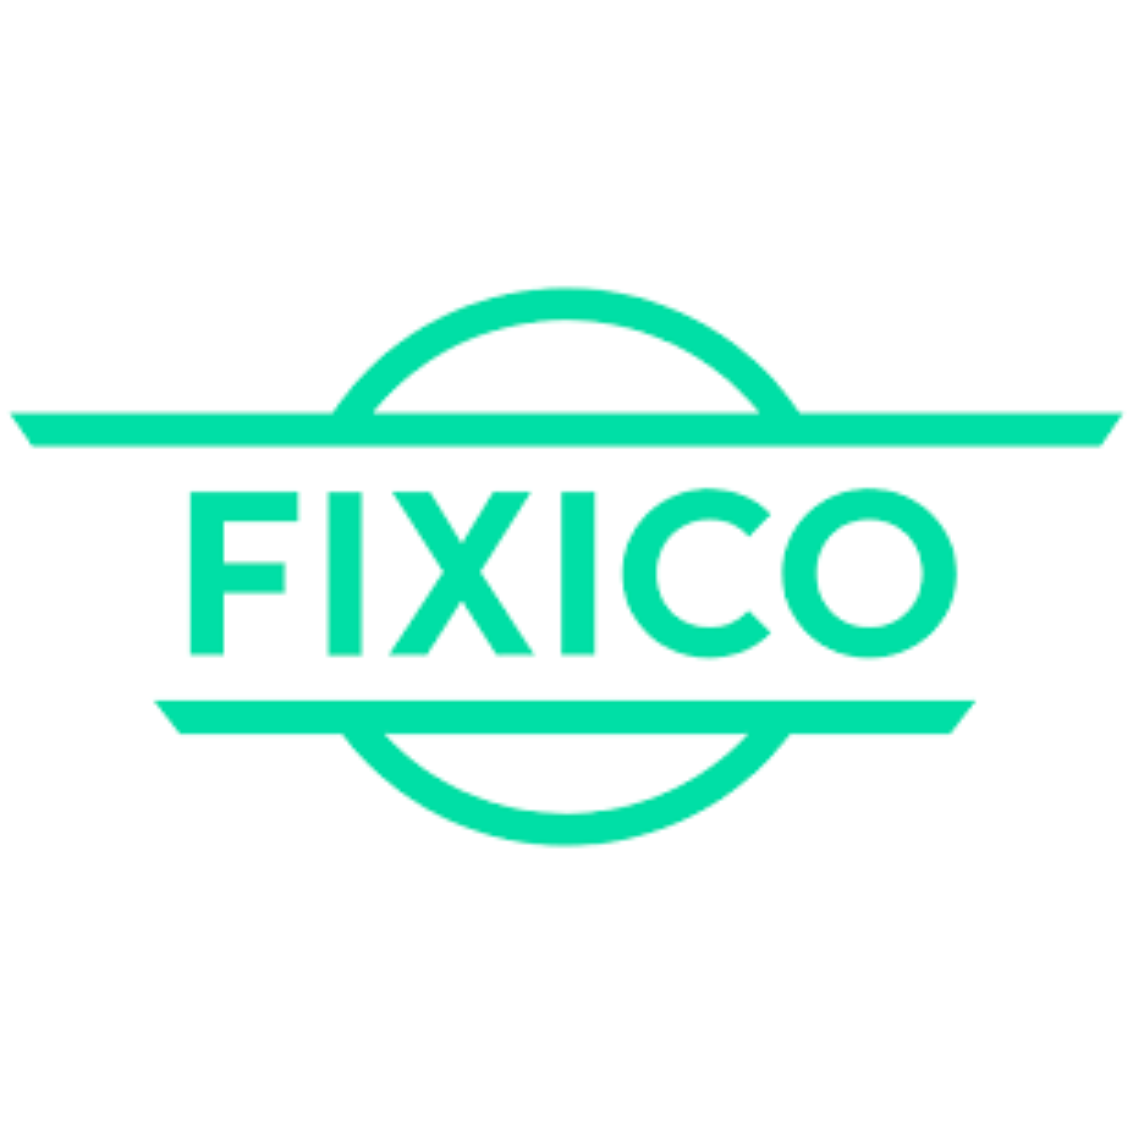 Fixico joins the NBRA